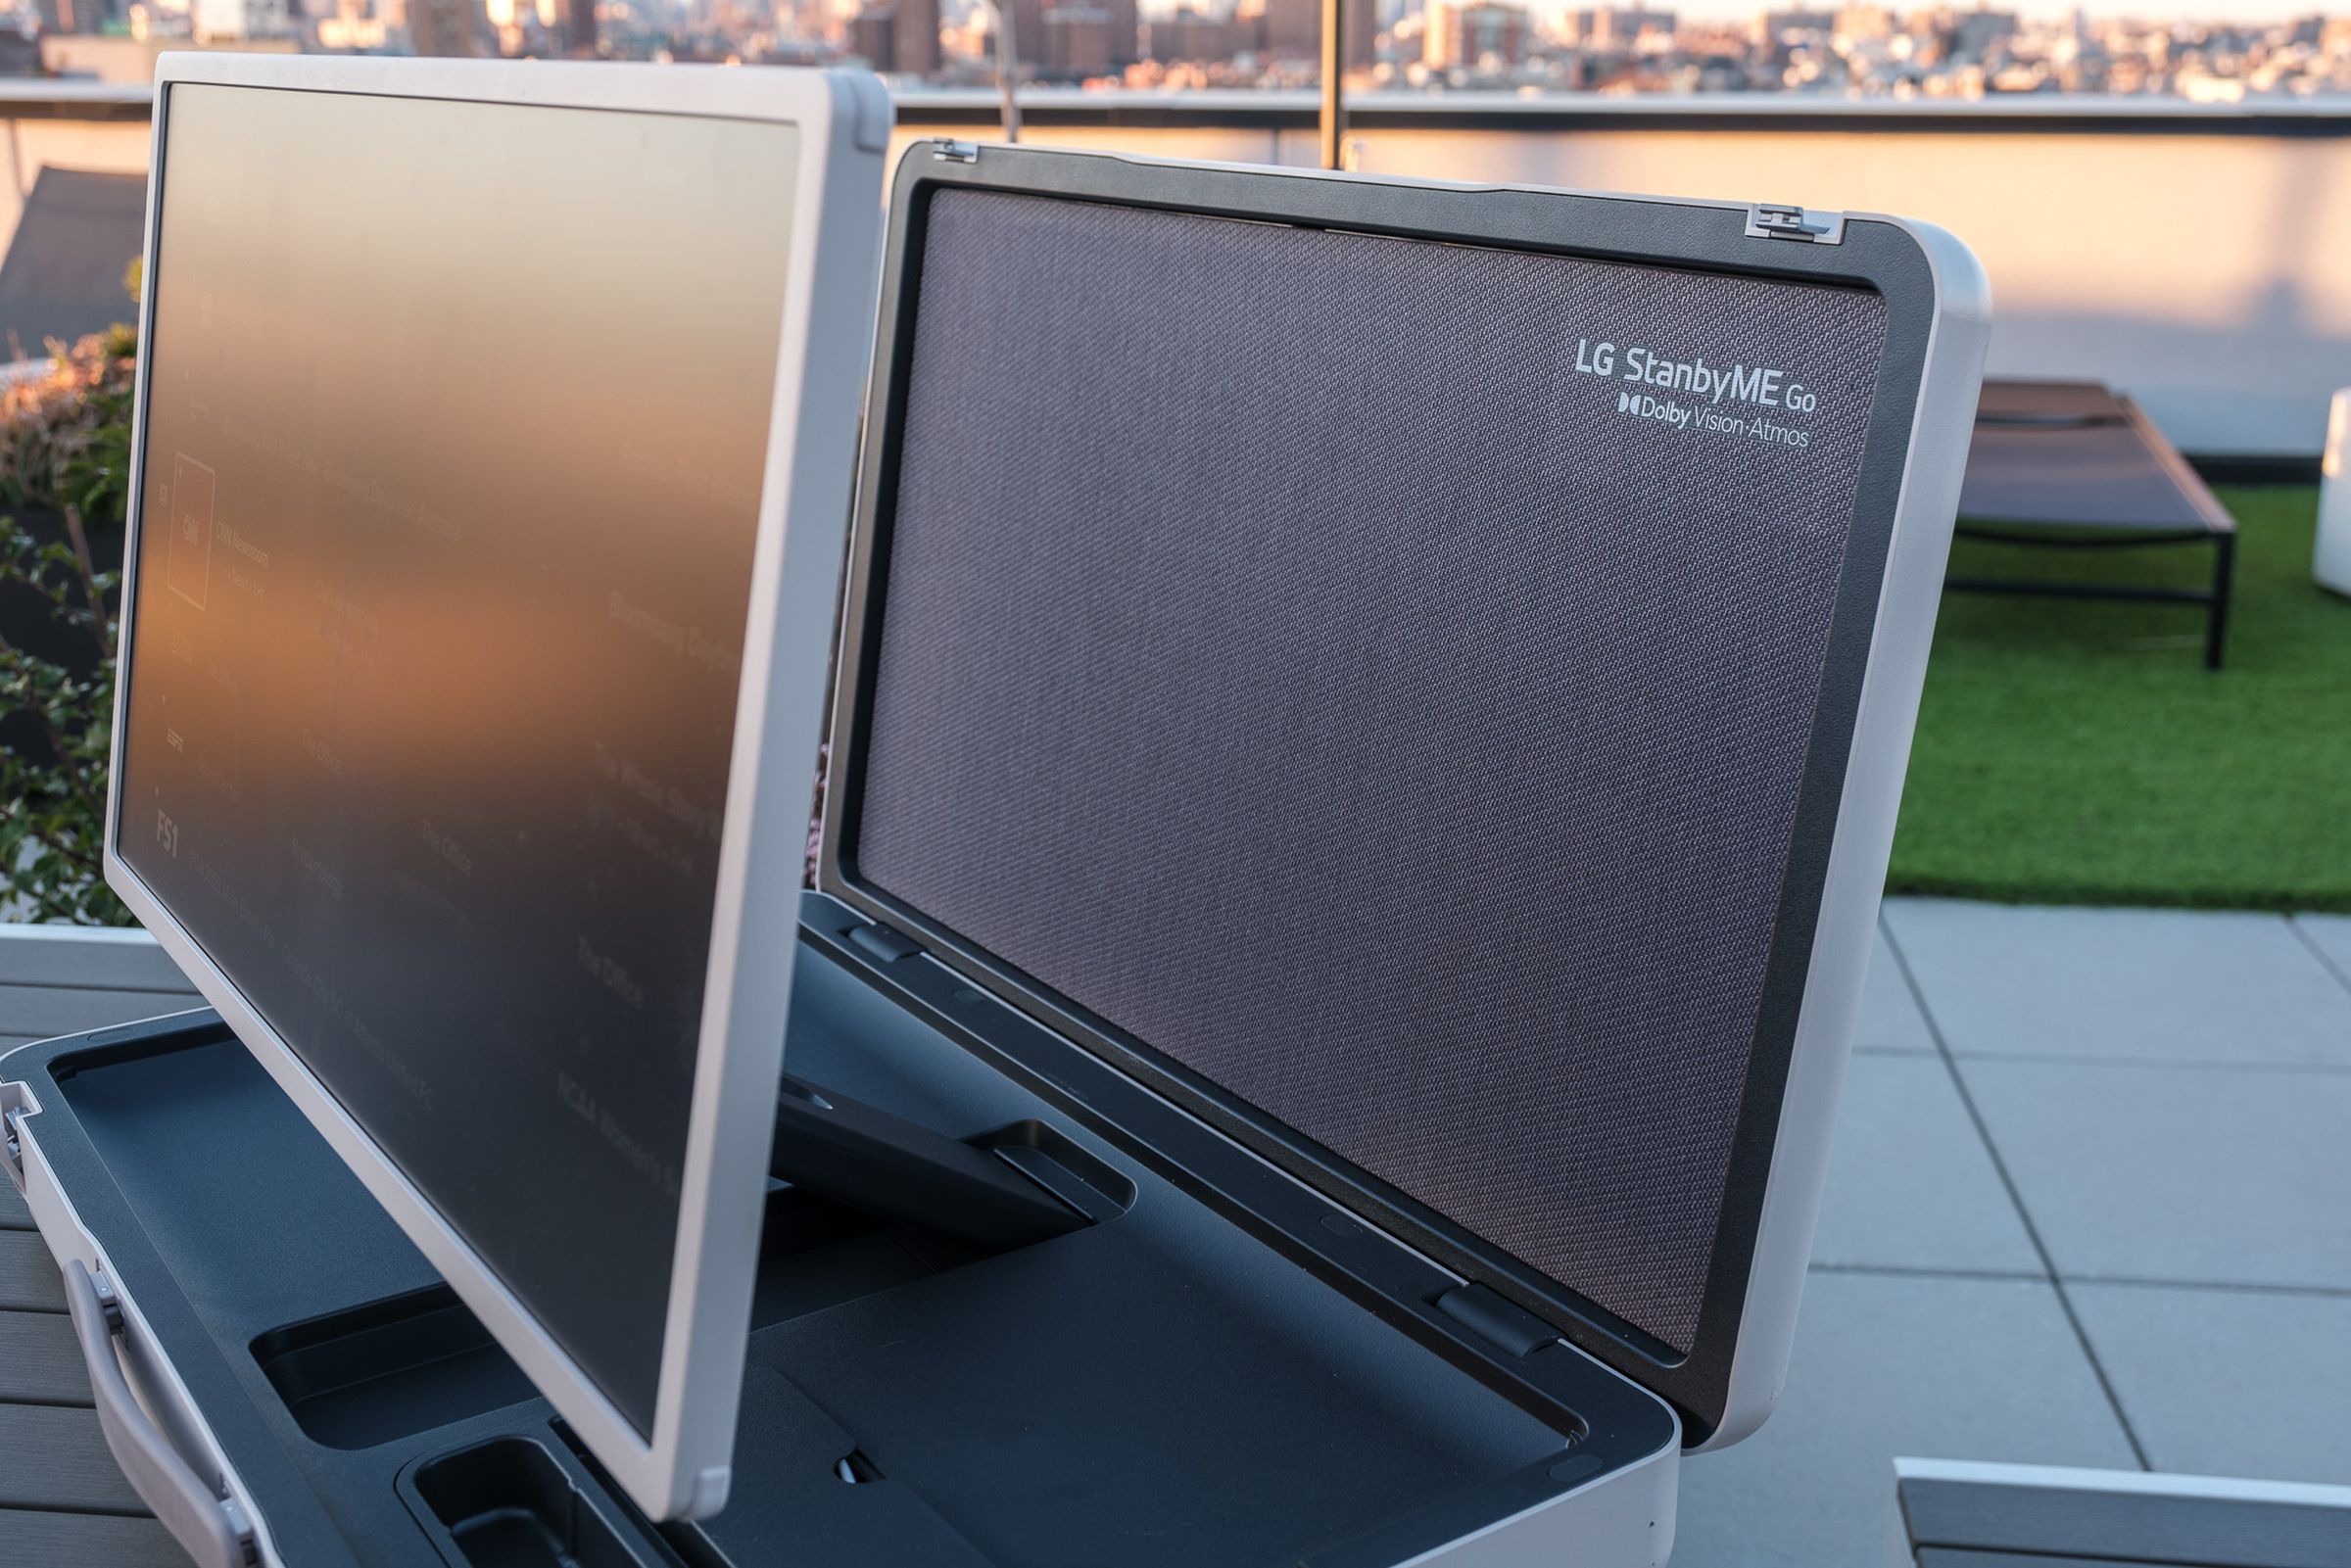 A photo showing the anti-glare screen and integrated speaker system on LG’s StanbyME Go briefcase TV.